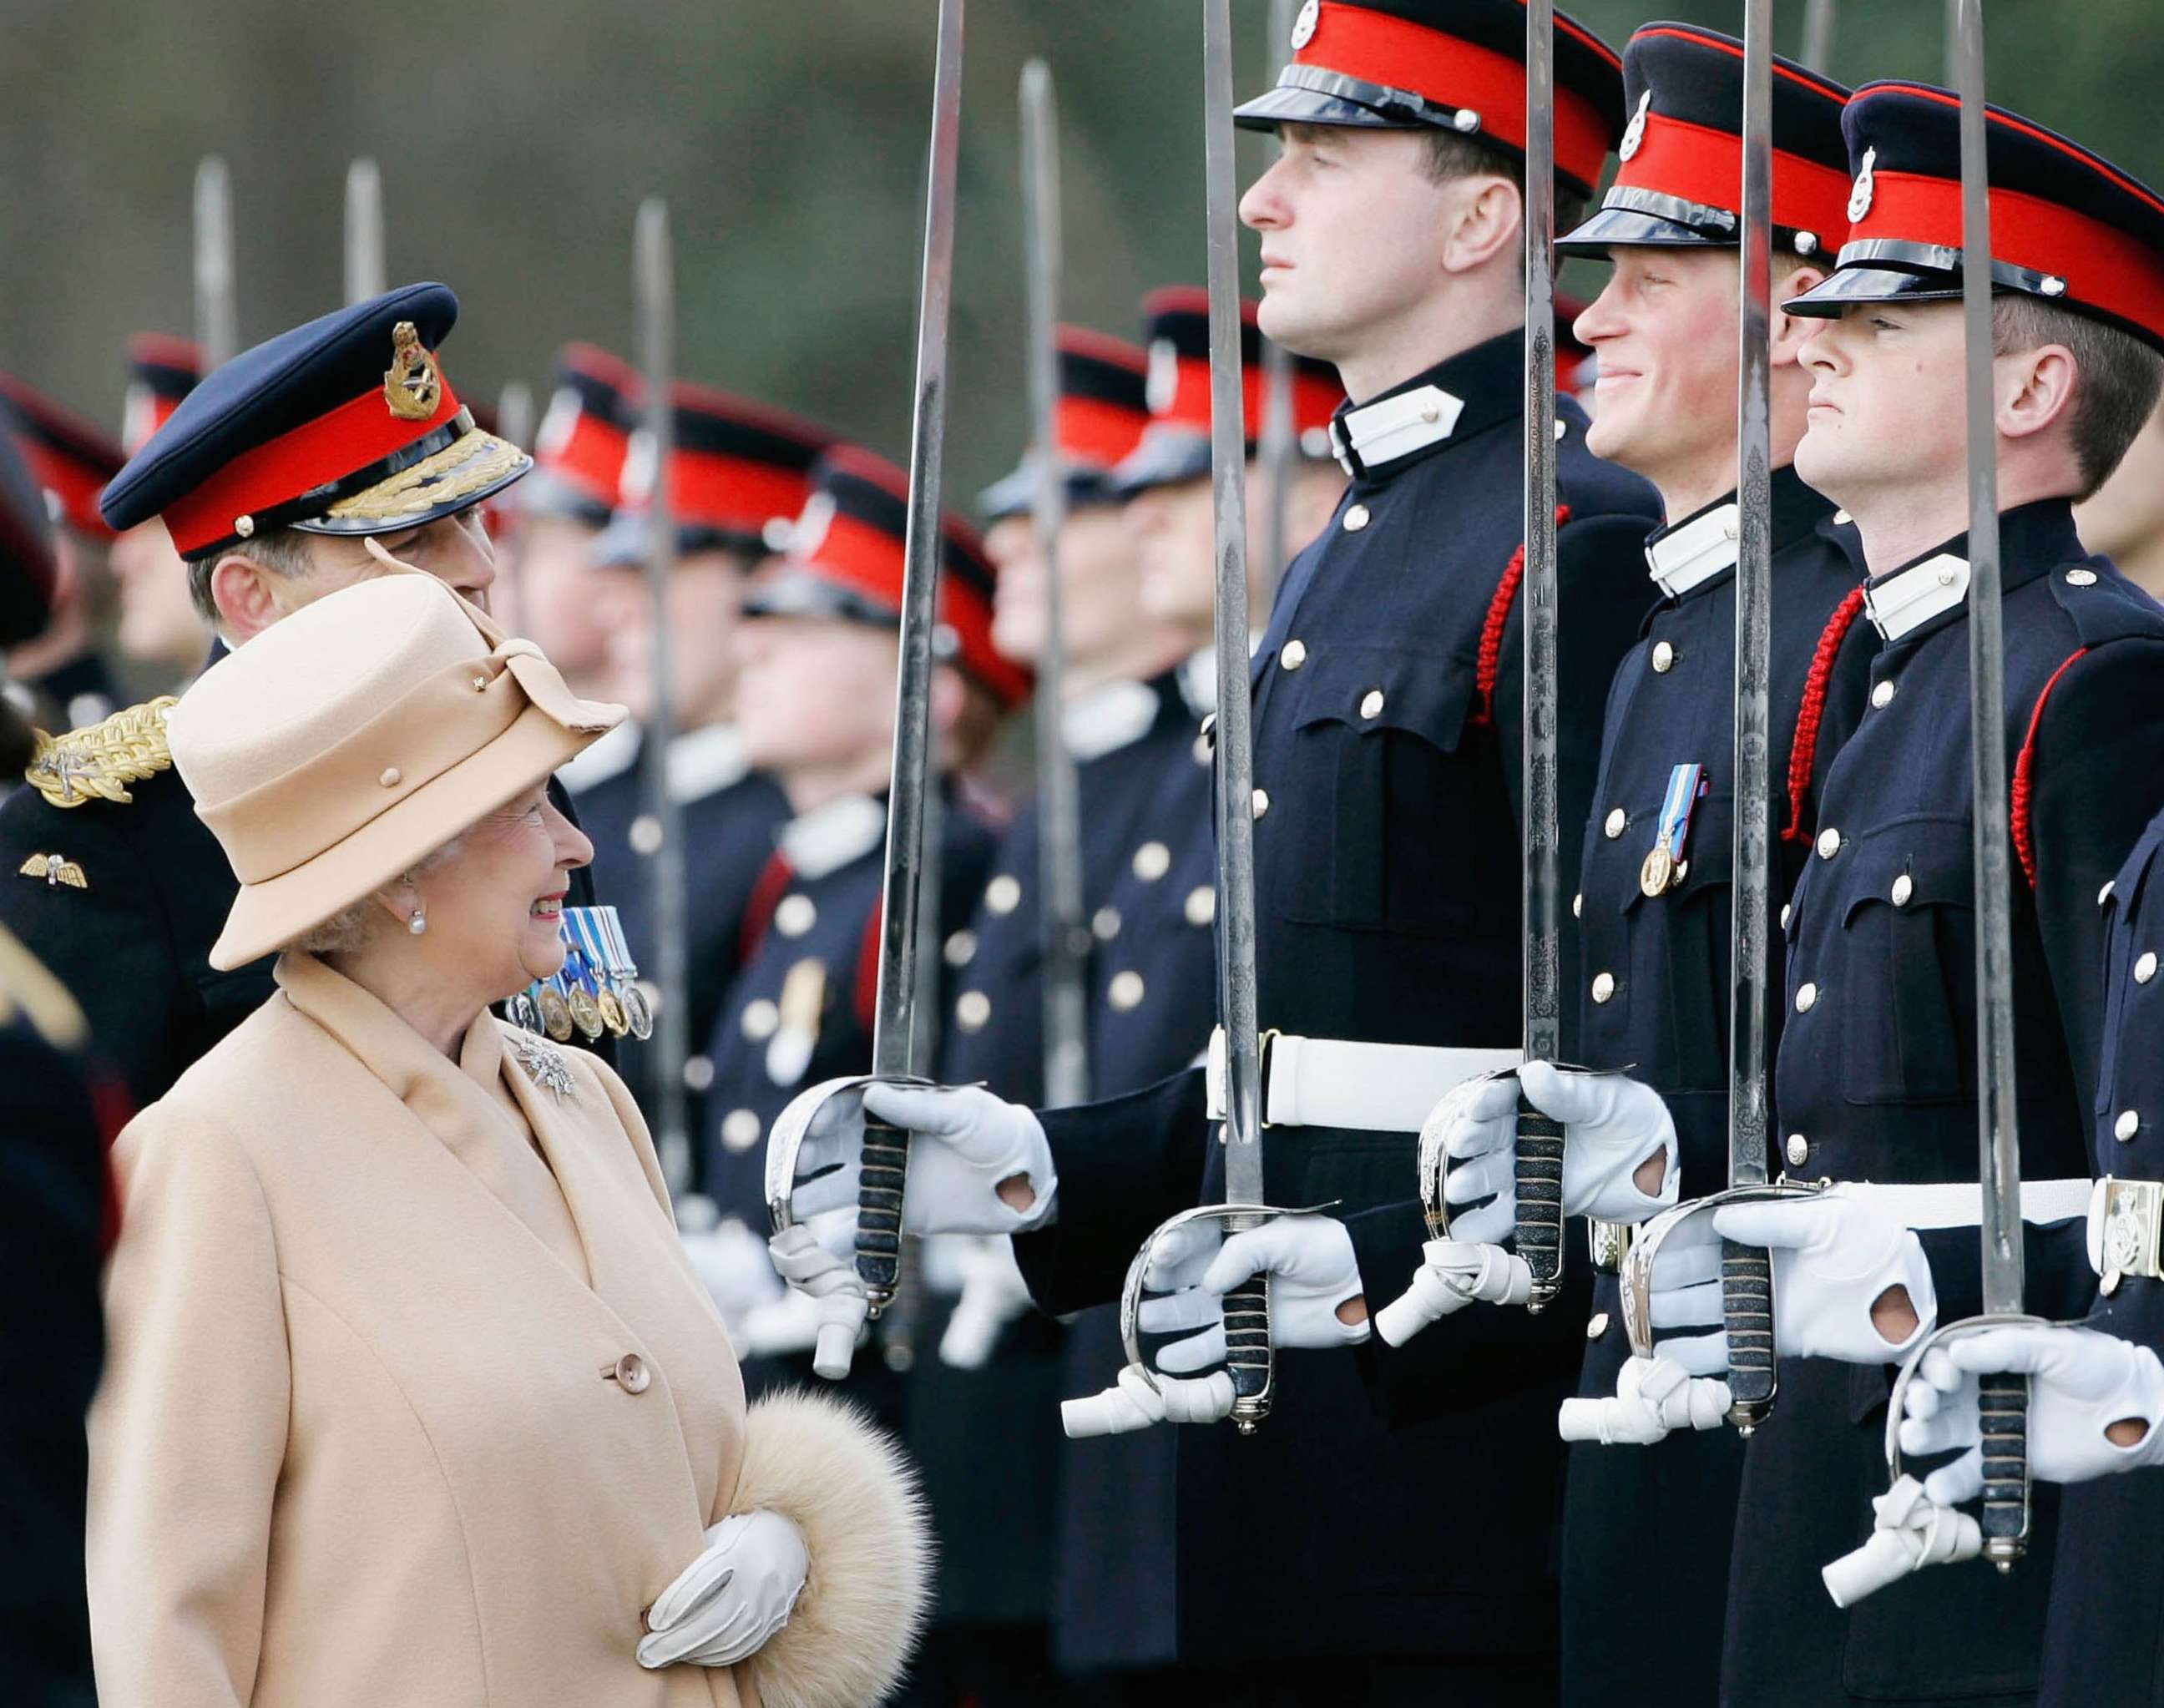 PHOTO: Queen Elizabeth II smiles at Prince Harry as she inspects soldiers at their passing-out Sovereign's Parade at Sandhurst Military Academy, April 12, 2006, in Surrey, England.